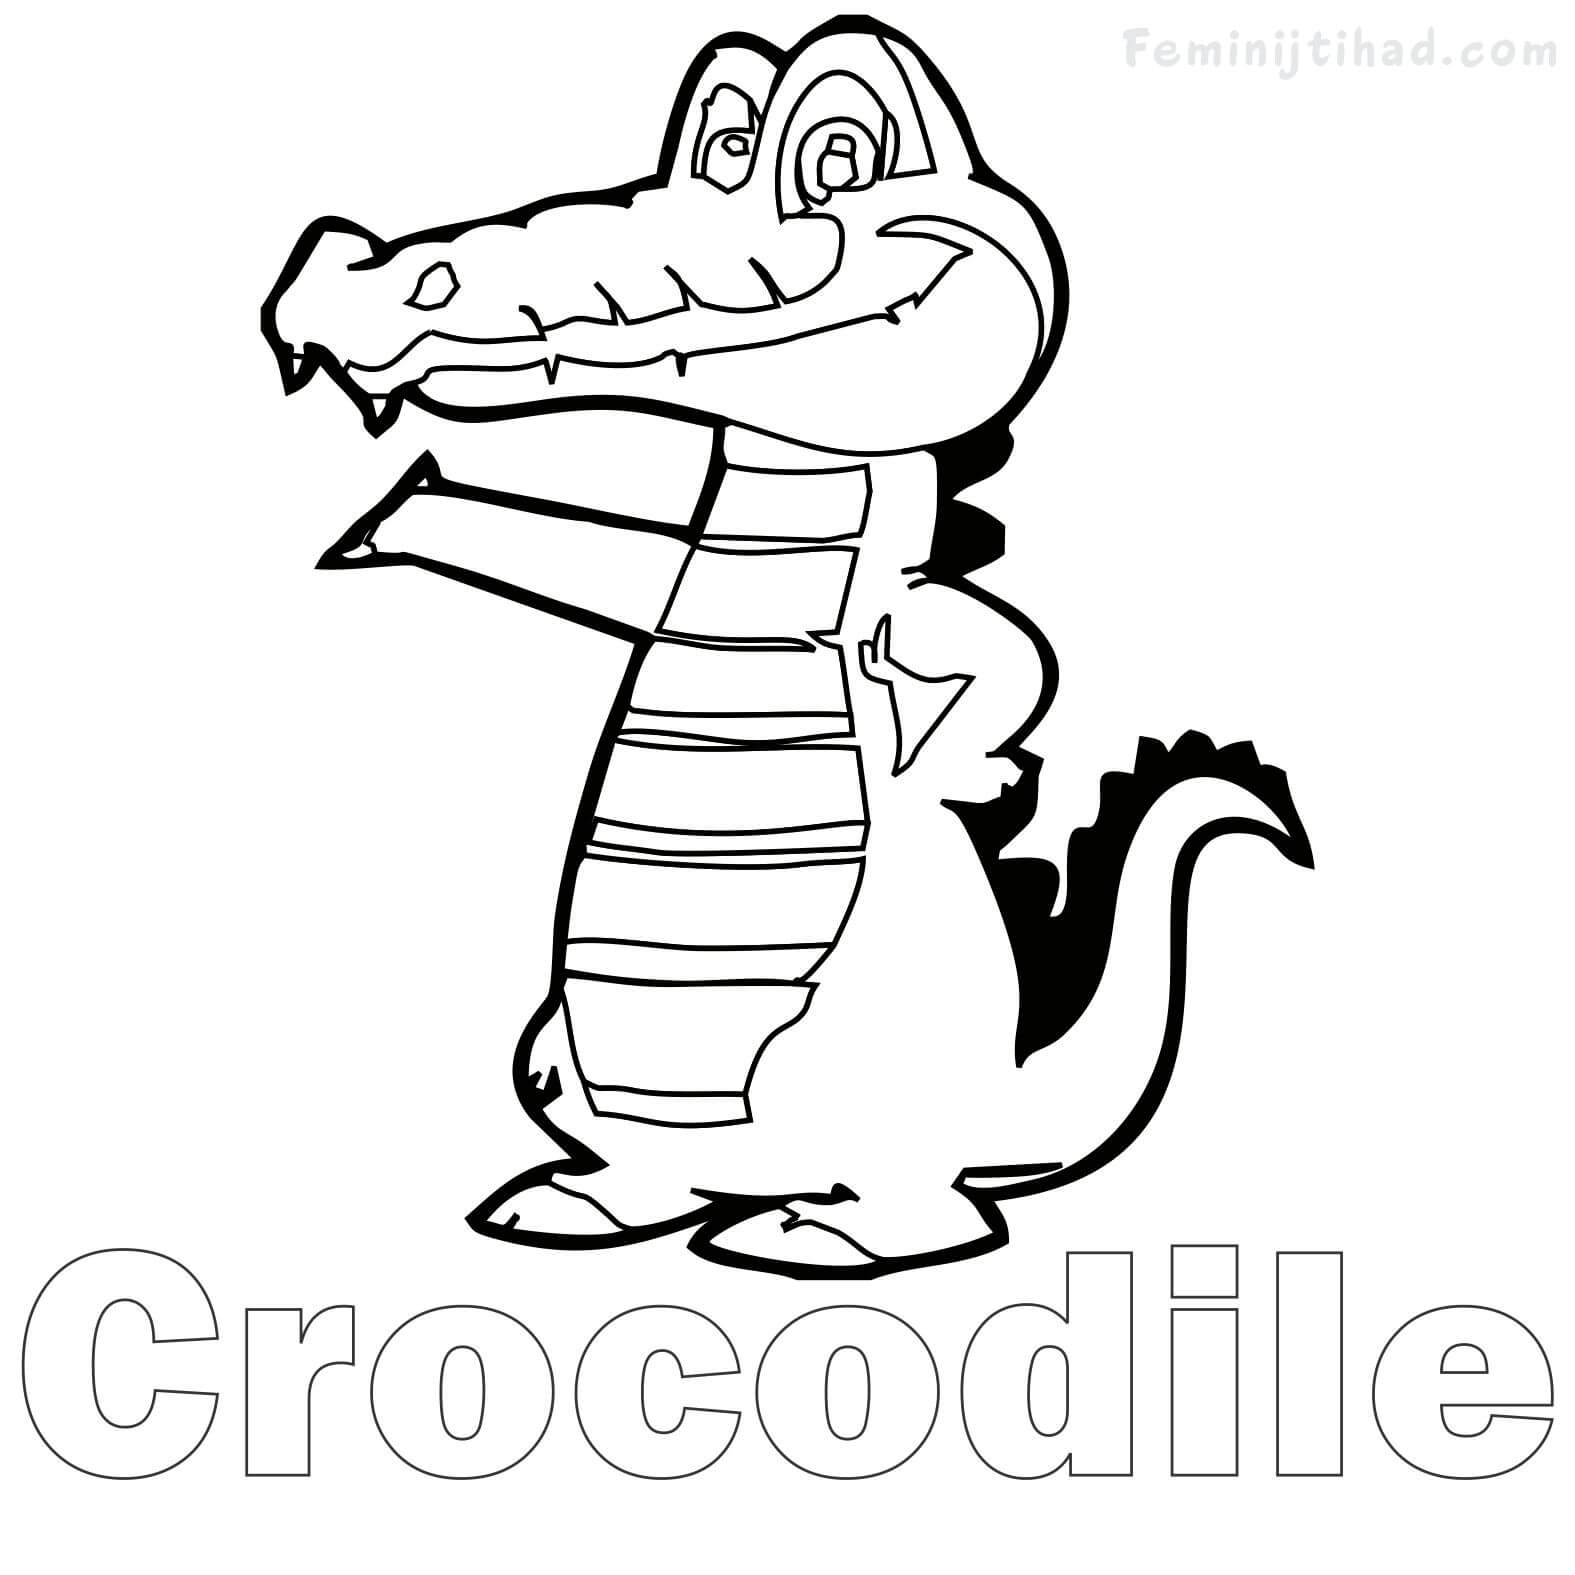 coloring page of a crocodile